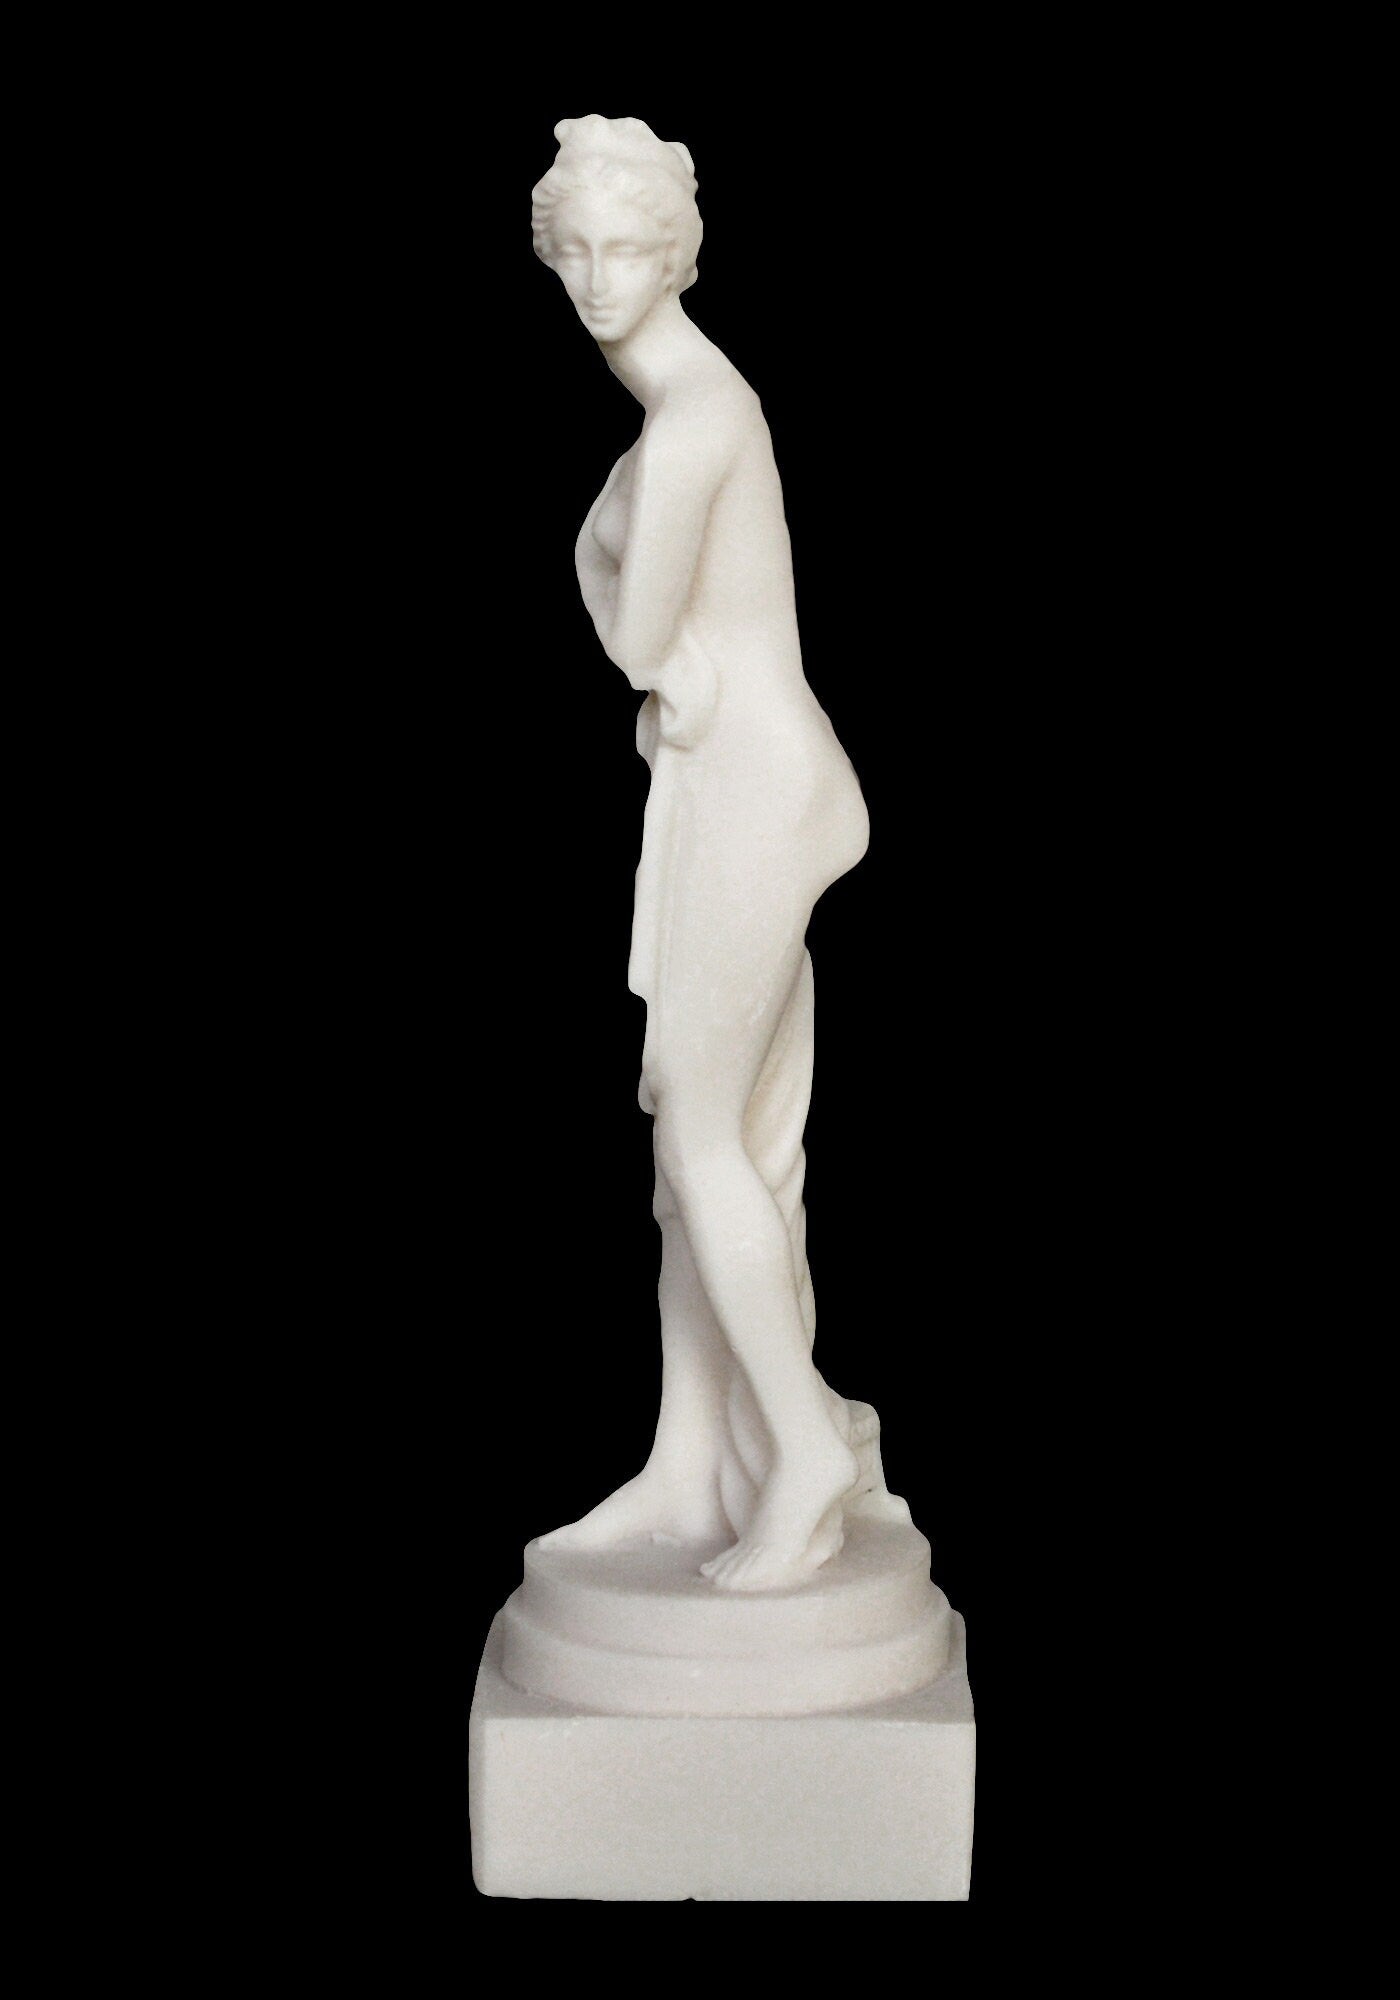 Sappho of Lesbos - 630–570 BC - Ancient Greek Lyric Poet - Tenth Muse - Ode to Aphrodite - Charm of Absolute Naturalness - Alabaster Statue